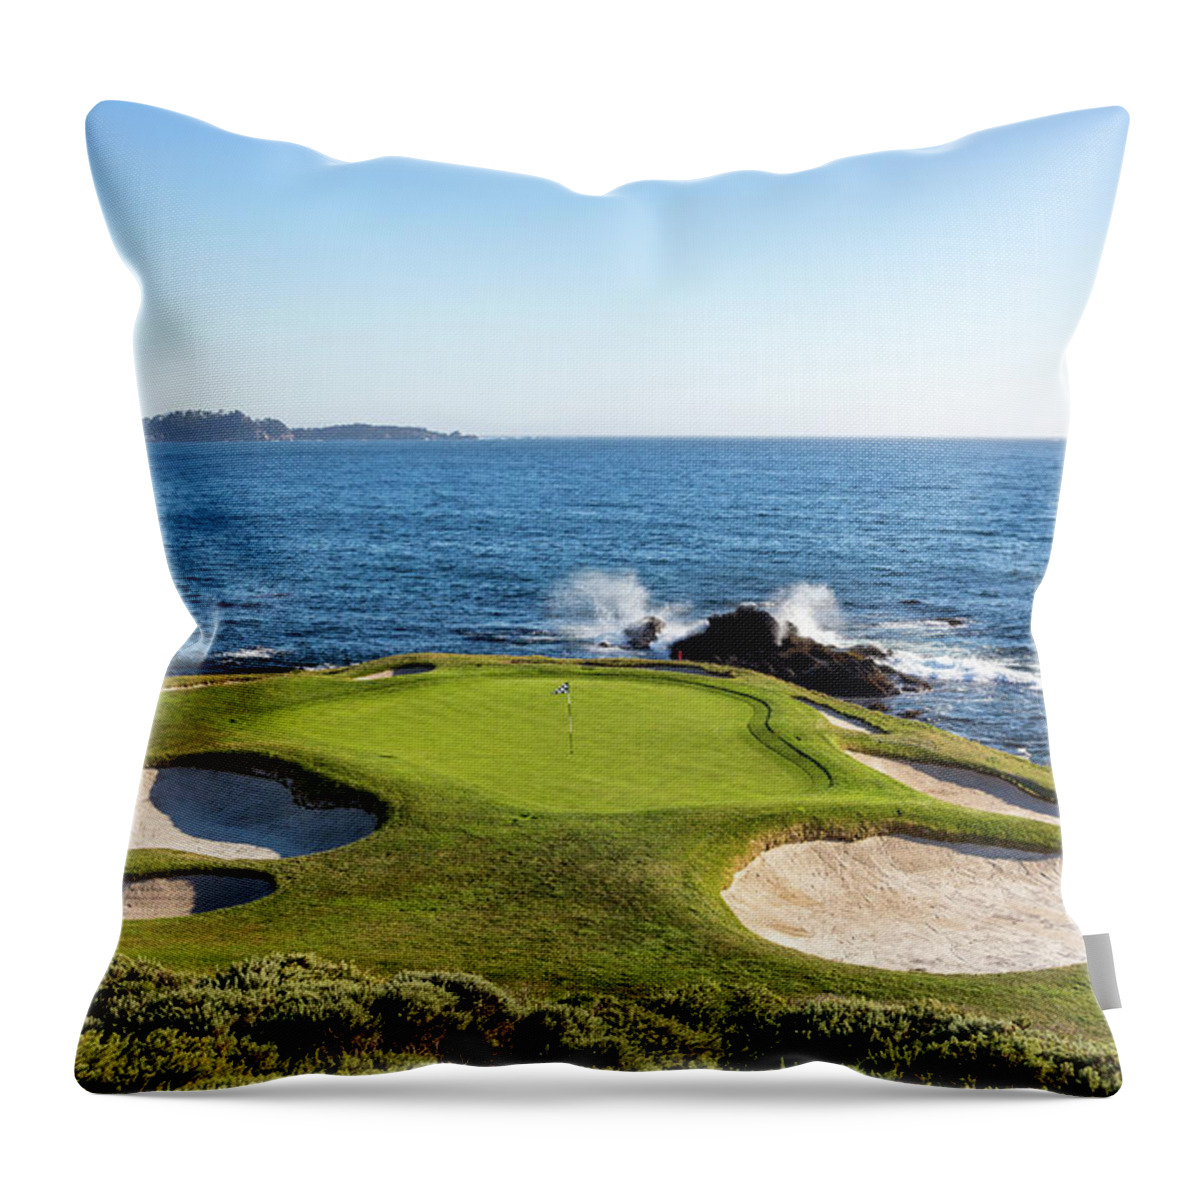 Pebble Beach Golf Course Throw Pillow featuring the photograph Par 3, 7th Hole at Pebble Beach by Mike Centioli